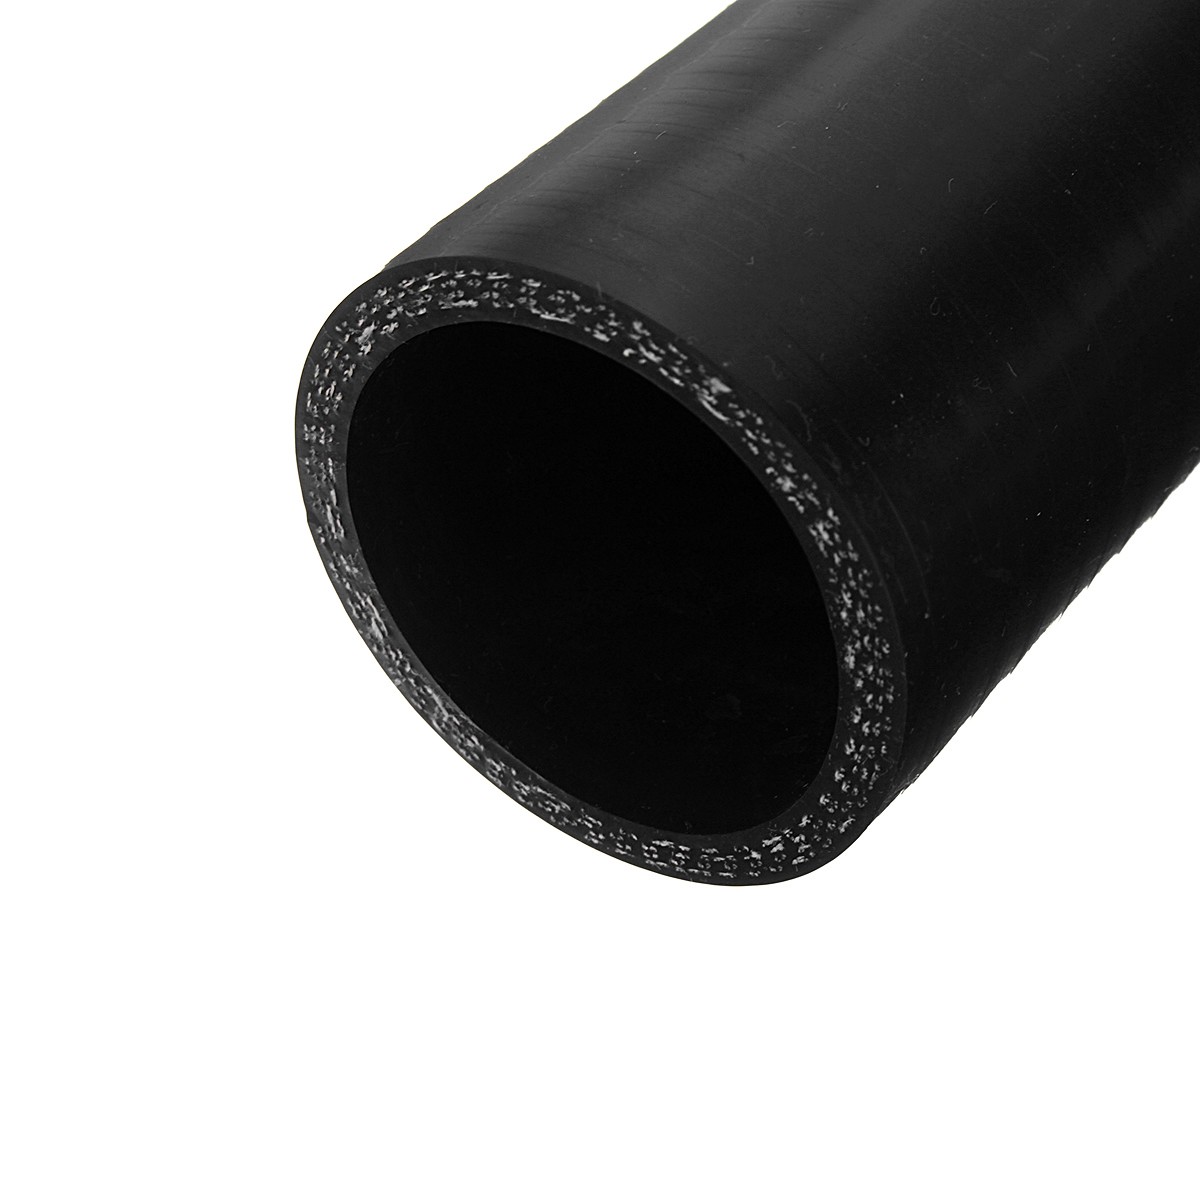 150mm-Black-Silicone-Hose-Rubber-15-Degree-Elbow-Bend-Hose-Air-Water-Coolant-Joiner-Pipe-Tube-1591449-6